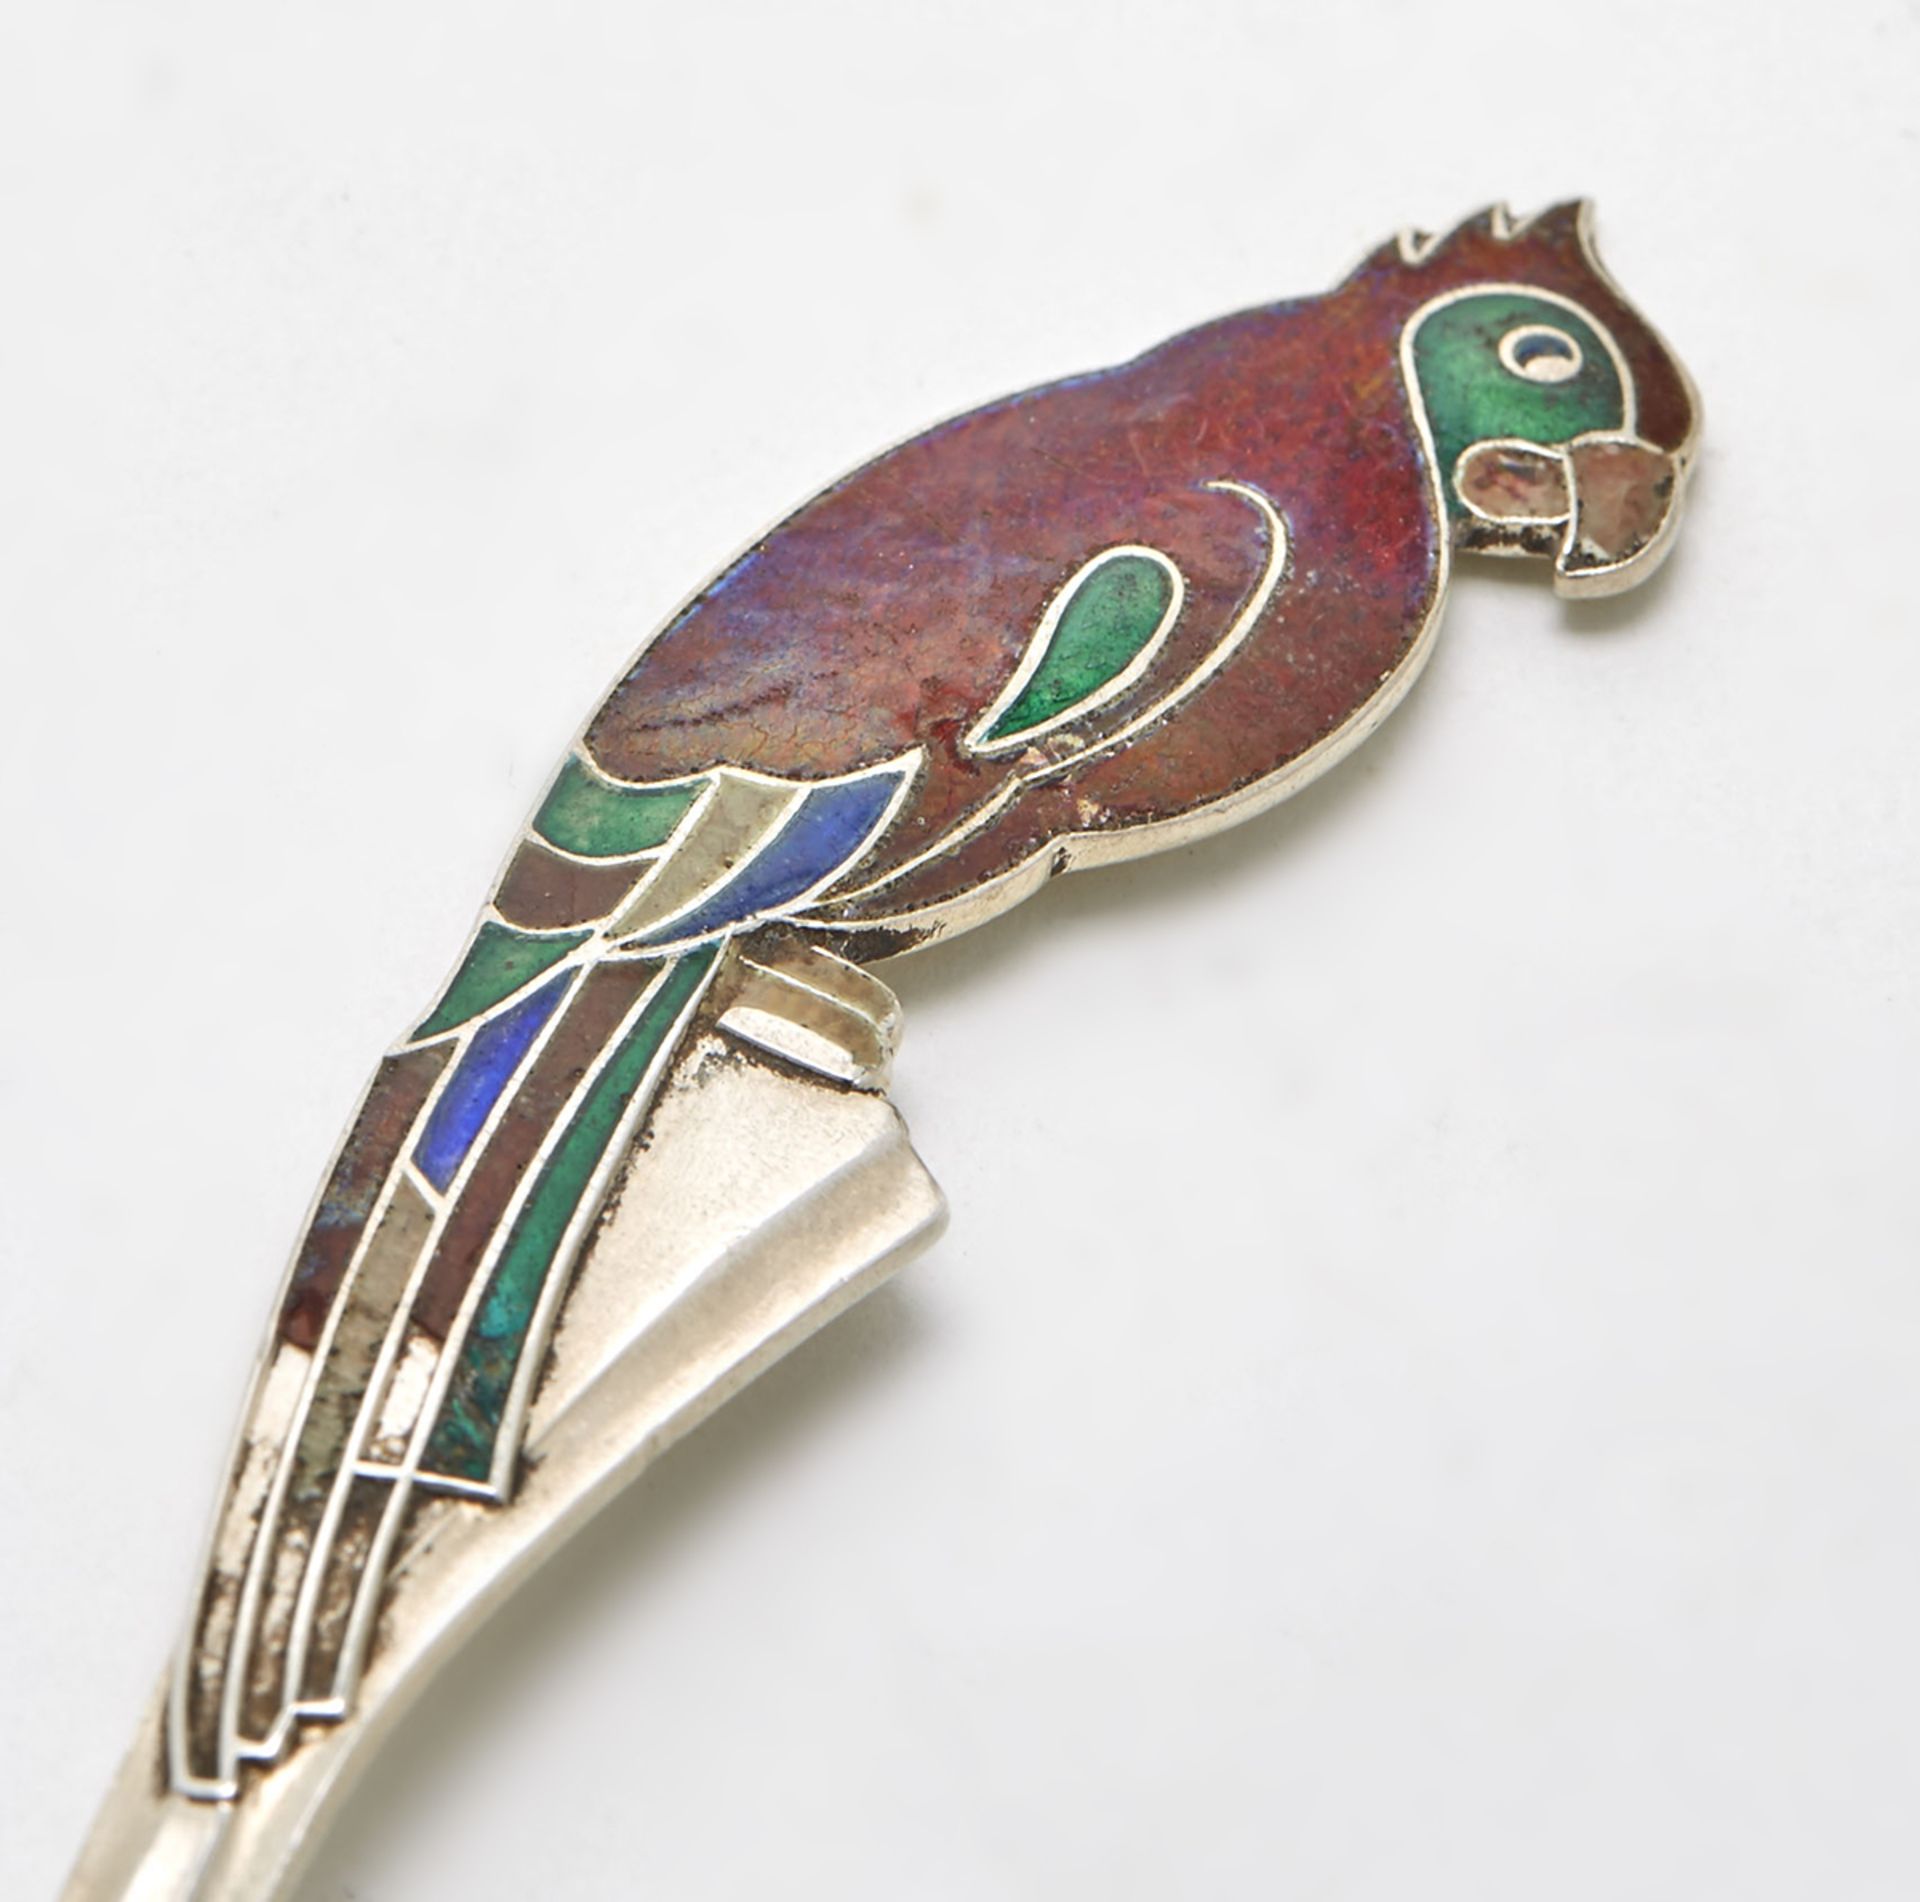 FINE QUALITY VINTAGE RUSSIAN ENAMEL PARROT SPOON 20TH C. - Image 2 of 5